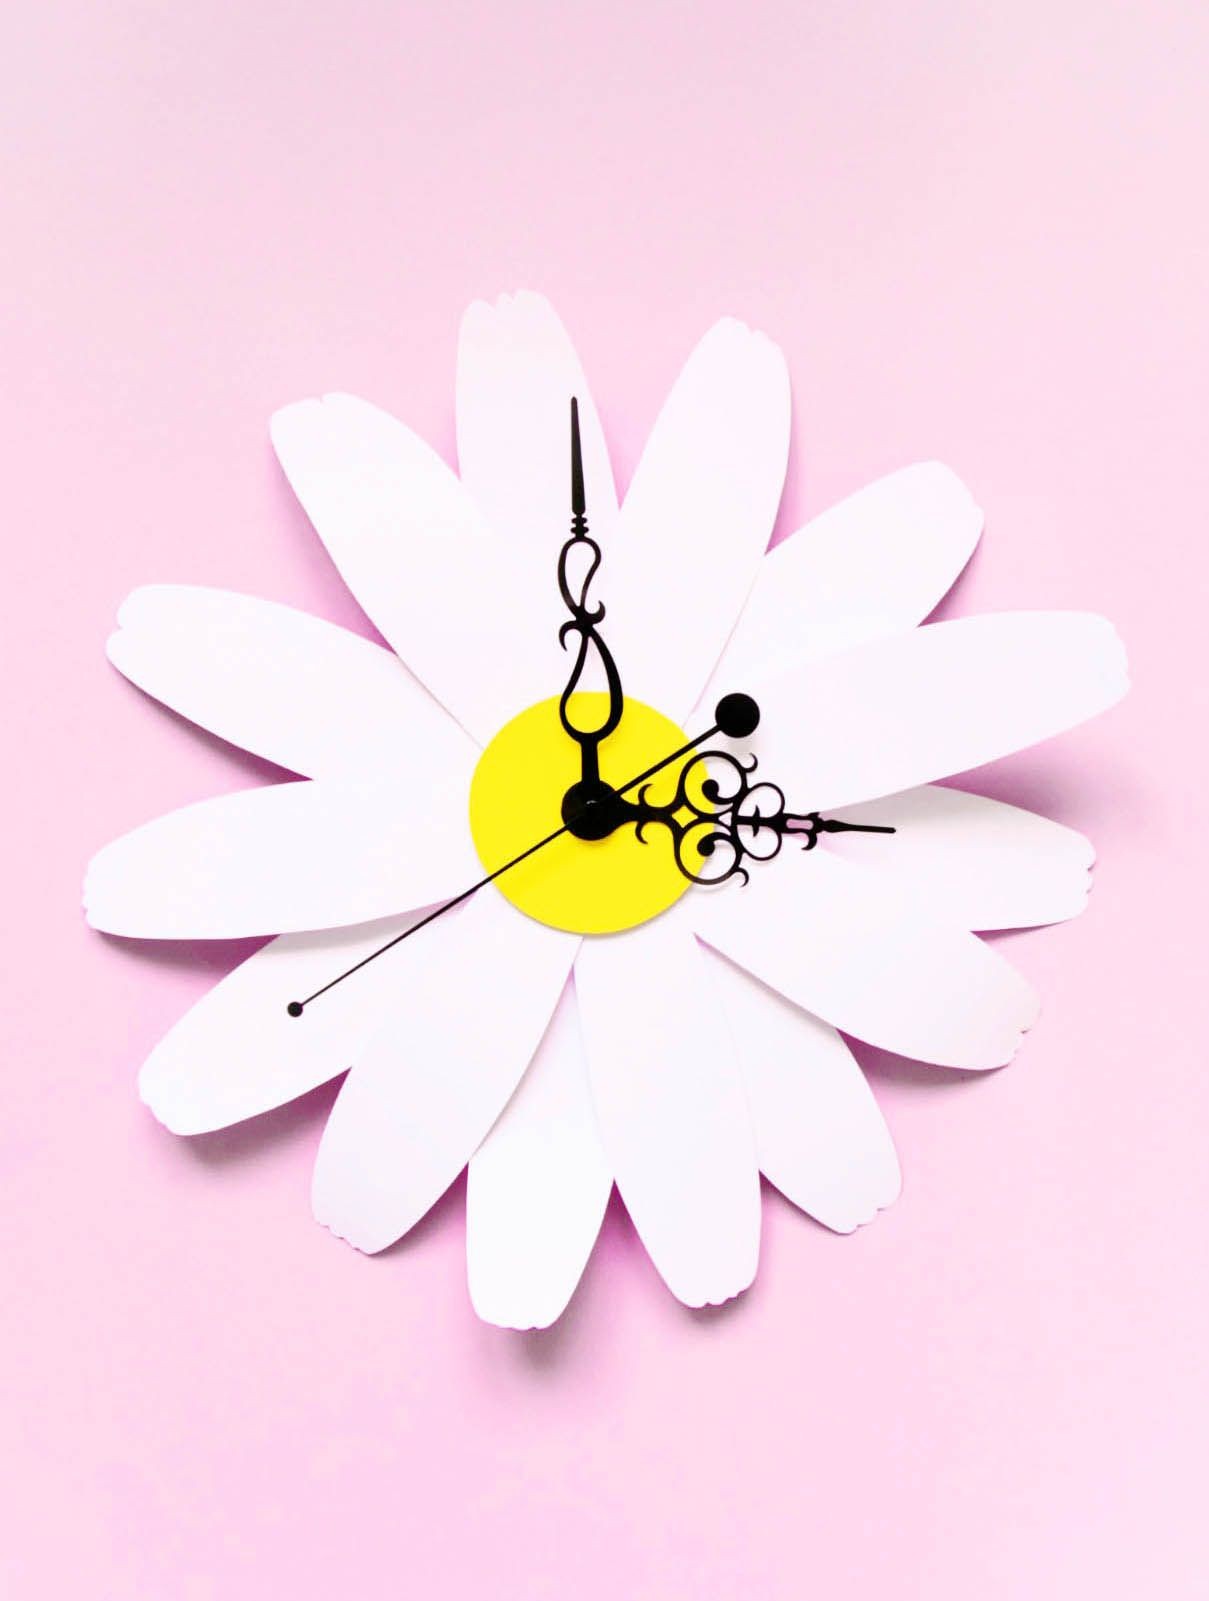 Papercraft Clock Want to Make the Cutest & Easiest Papercraft Clock Project You Can